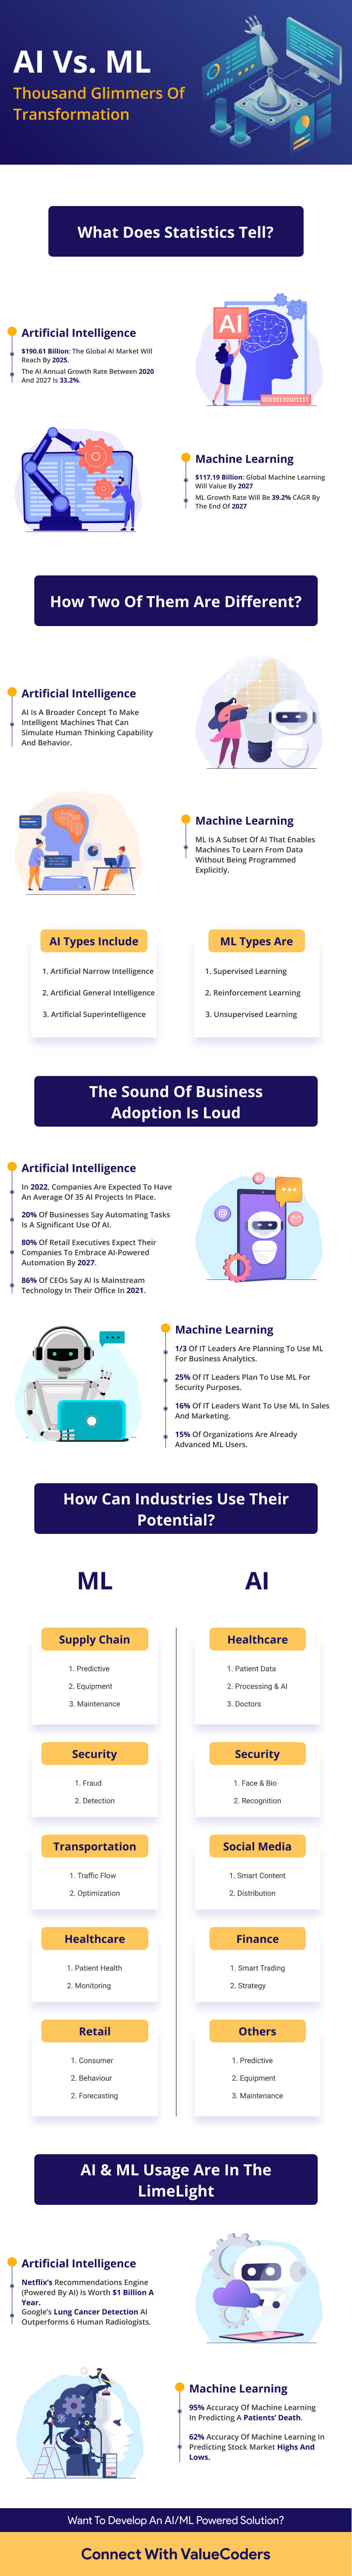 Artificial Intelligence vs Machine Learning: Unleashing Power Of Tech In Unison [Infographic]